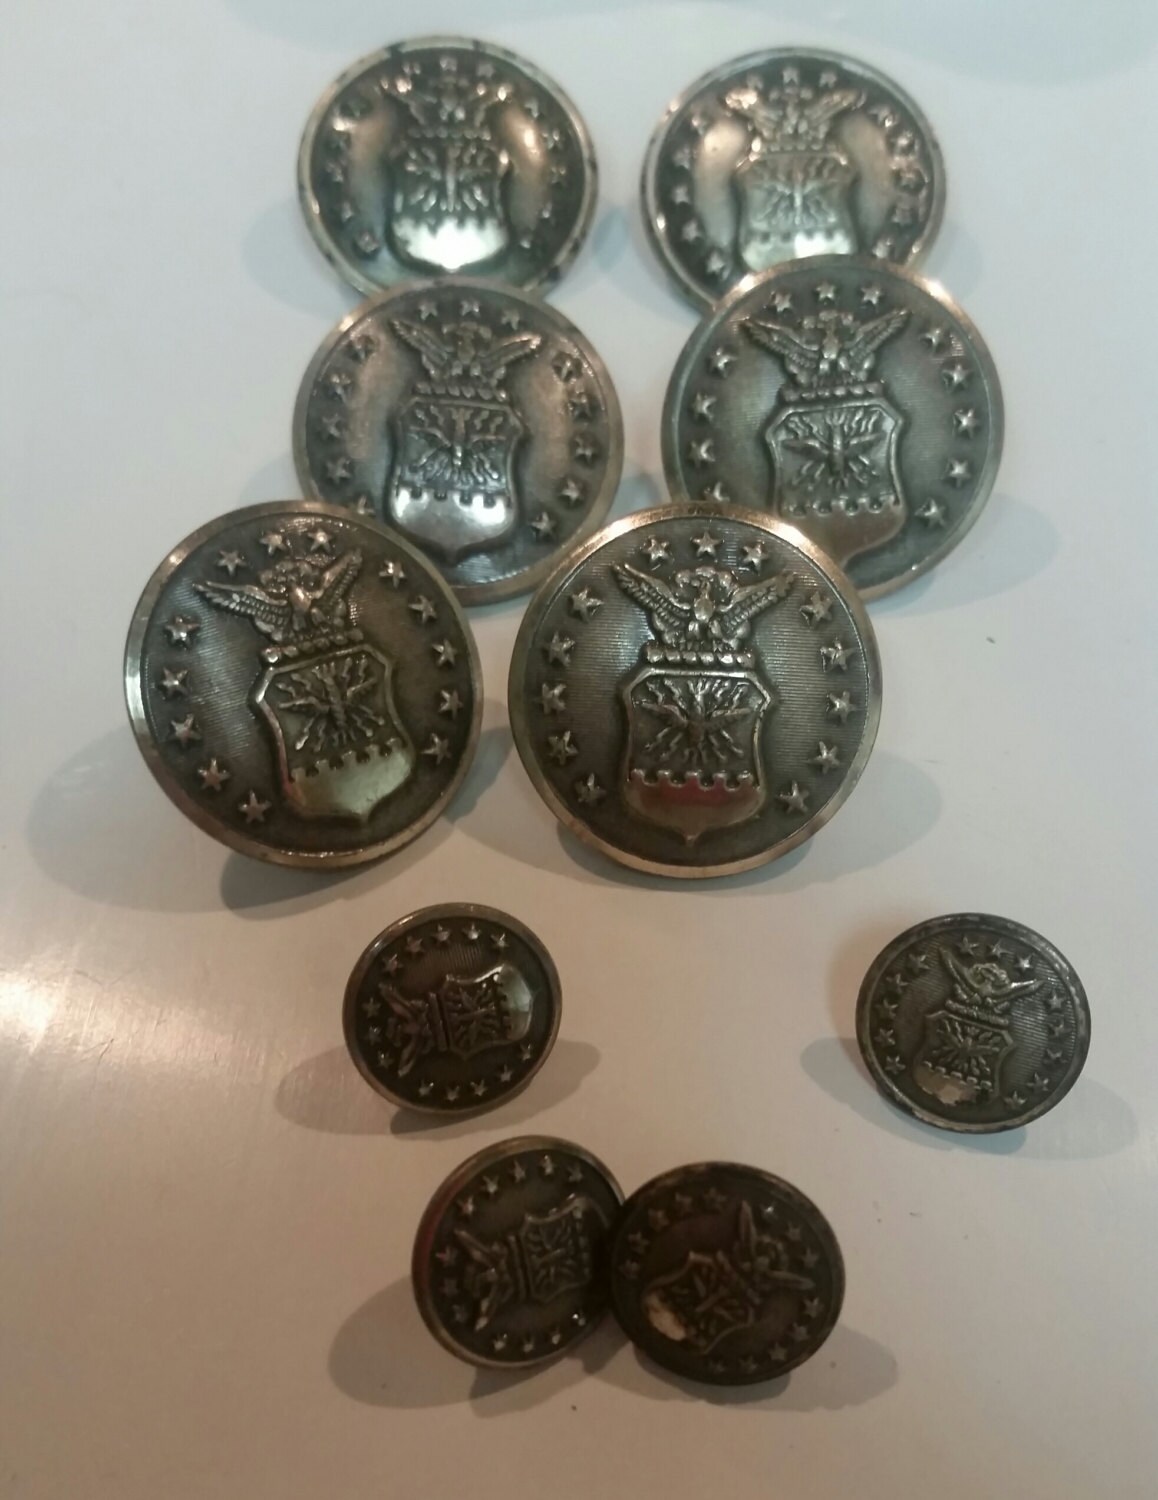 13 Star U.S. Air Force Buttons Silver Tone Vintage Buttons